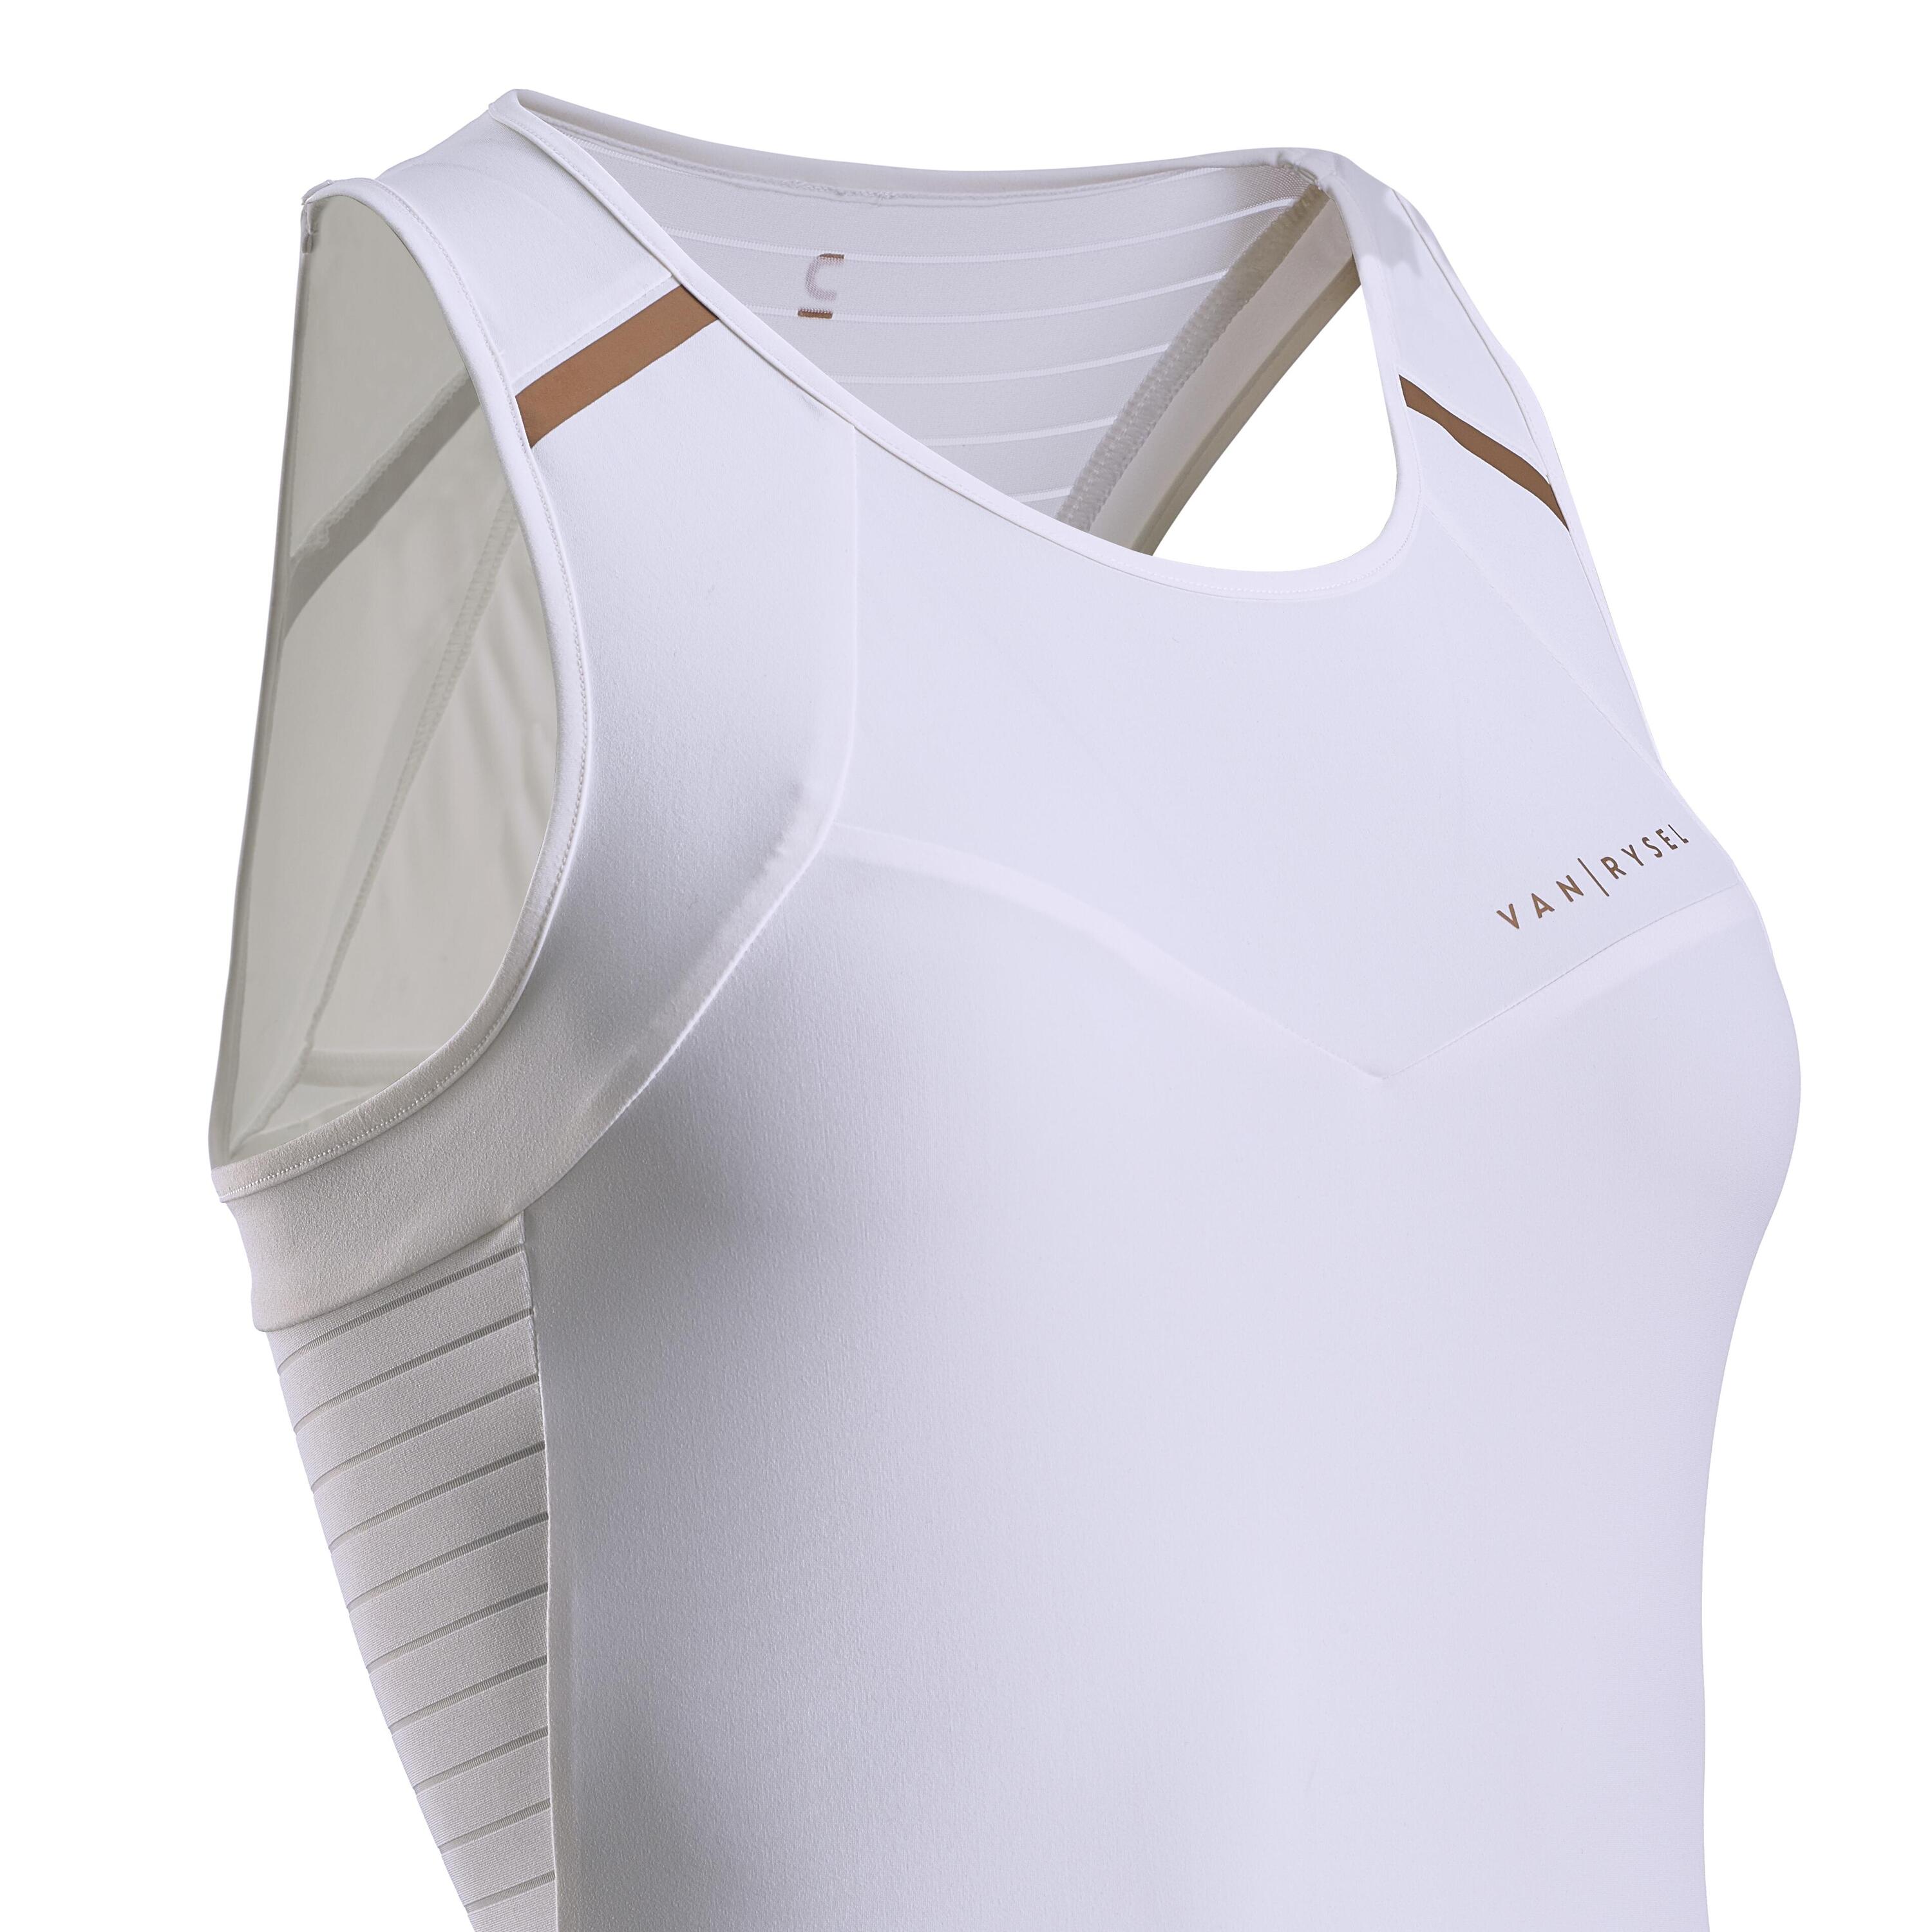 Women's Road Cycling Tank Top RCR - Off White 5/6